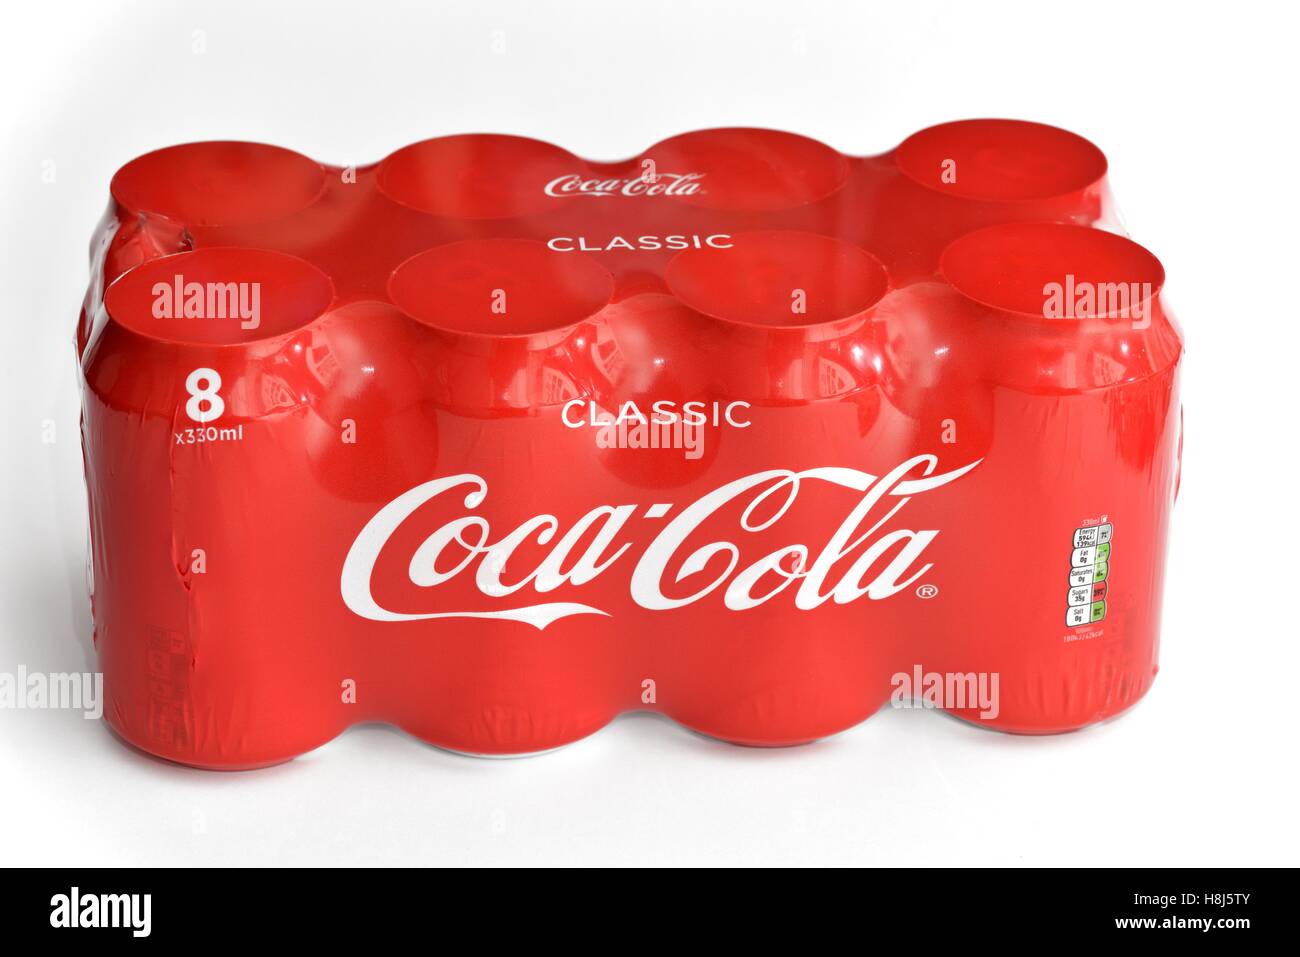 classic coca cola 8 can retail pack Stock Photo - Alamy